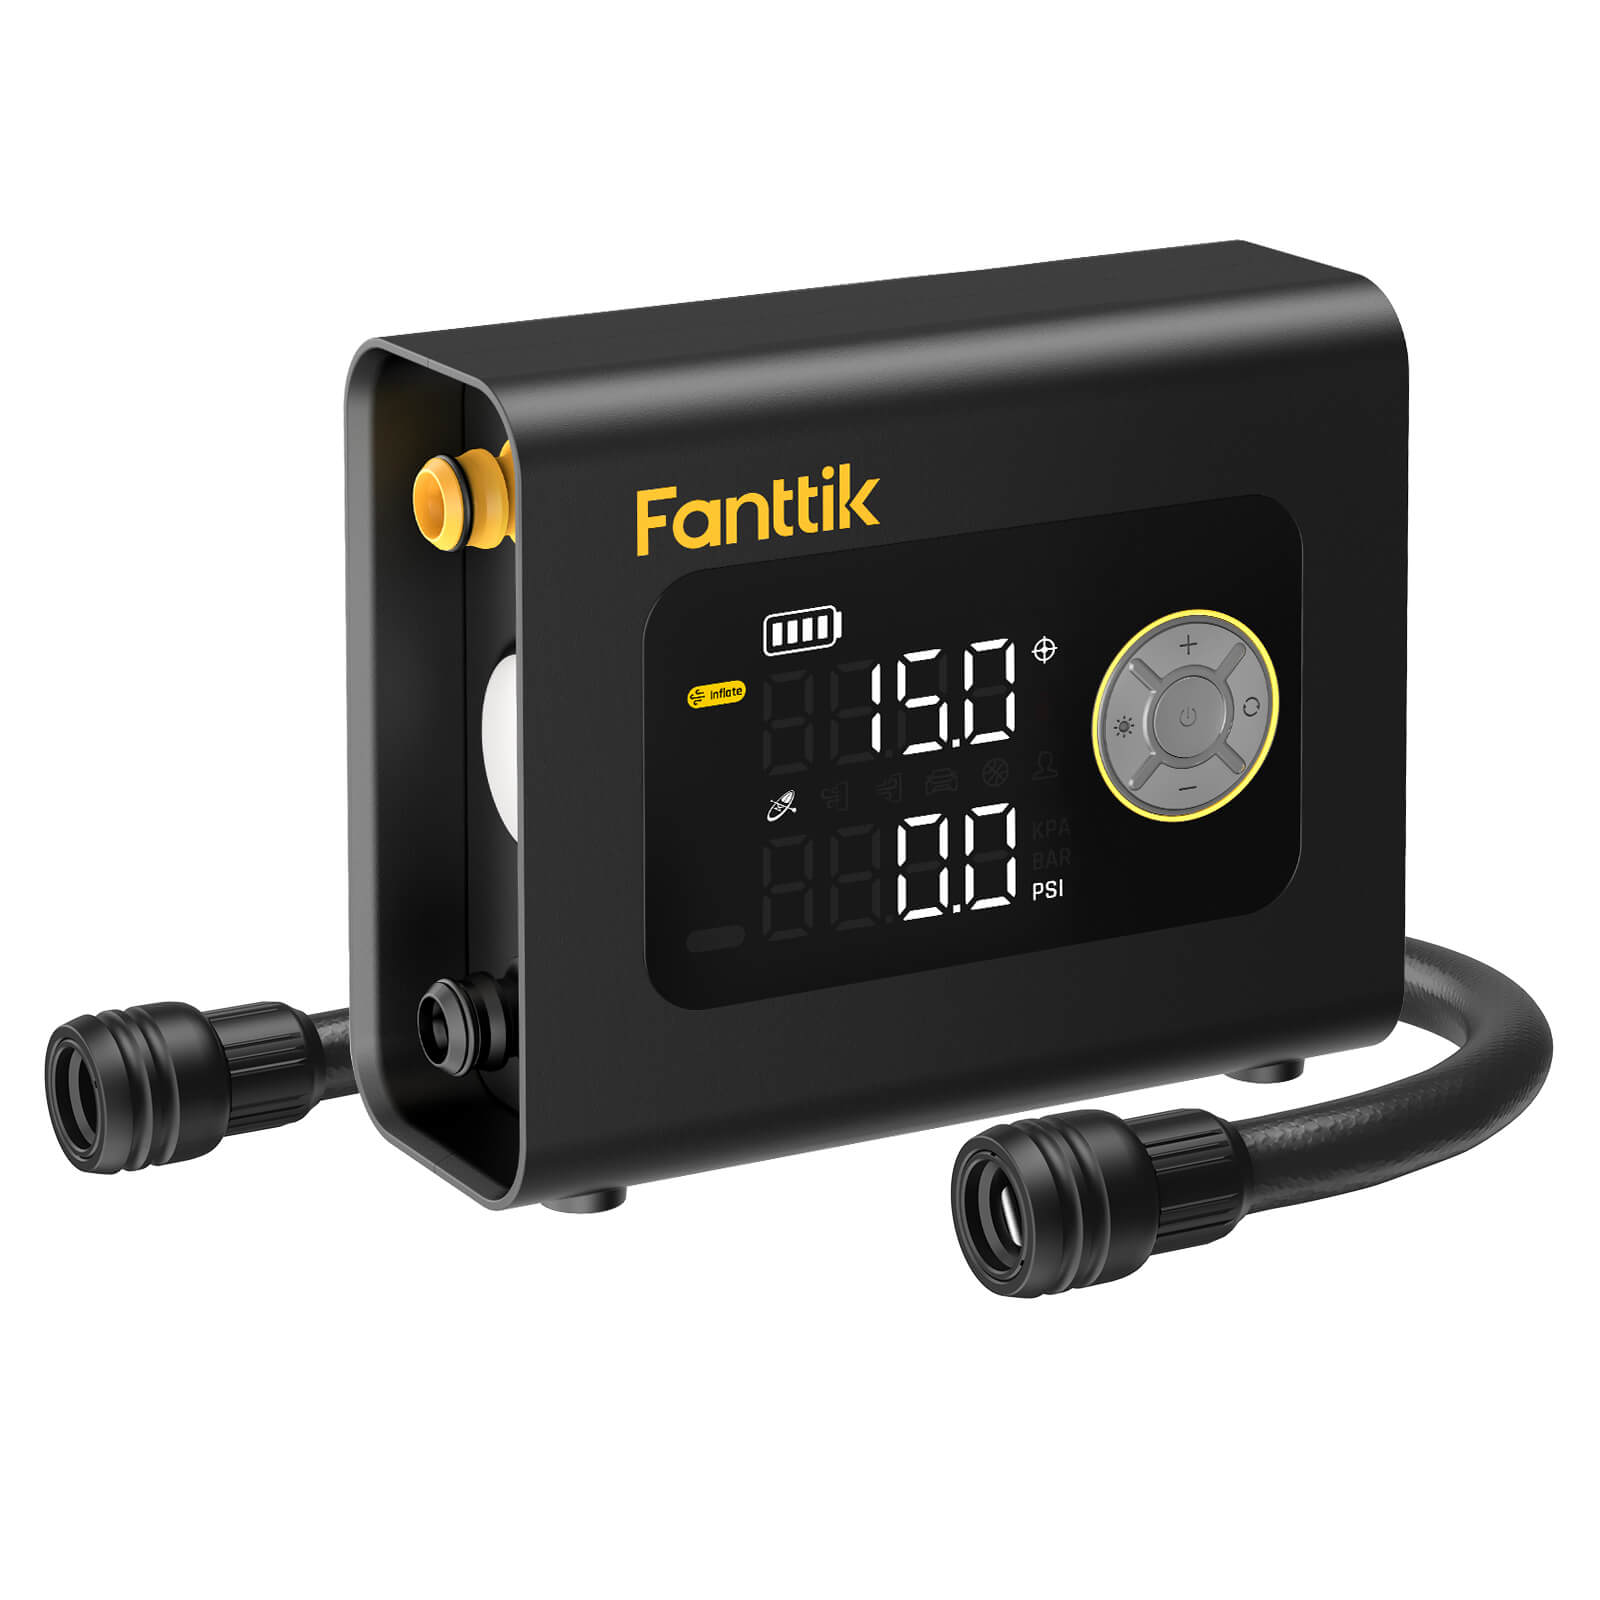 Fanttik X9 Cross Paddle Board Air Pump, Portable Tire Inflator | Max 75PSI with Auto-Off, Deflation | Air Pump with Light and Power Bank | for SUP, Car, Motorcycle, Board, Kayak, Tent etc.